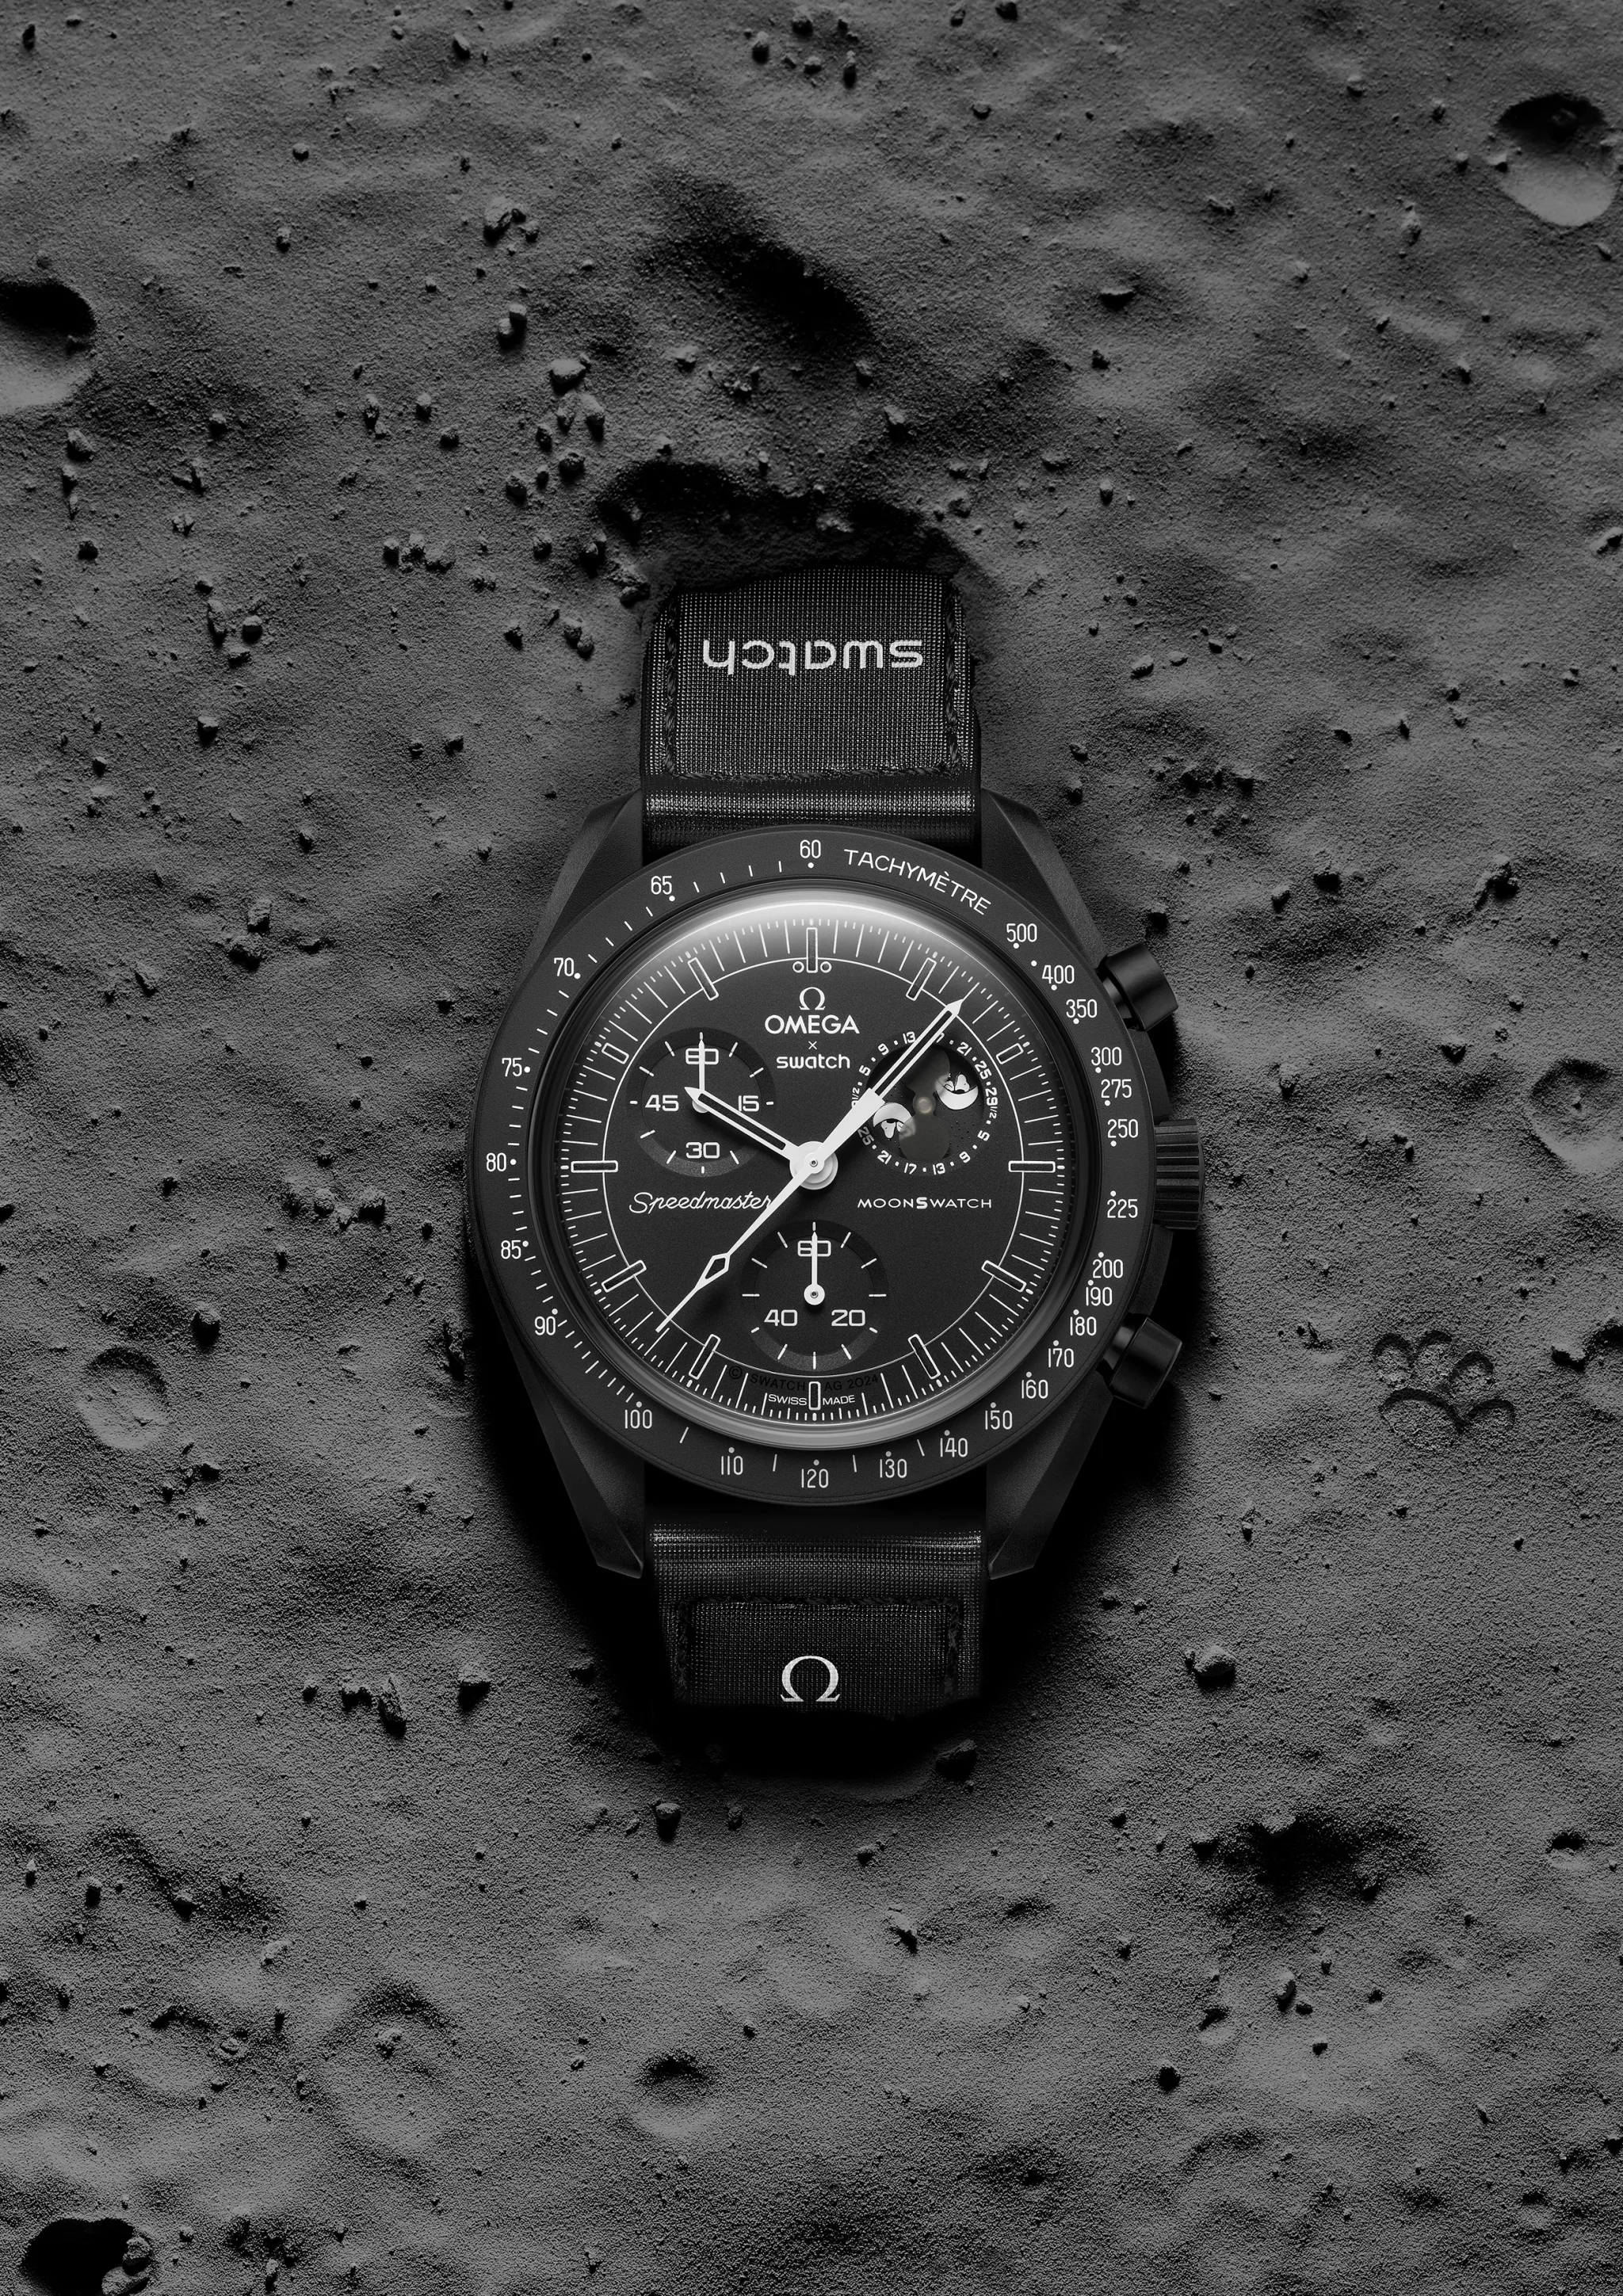 Bioceramic MoonSwatch MISSION TO THE MOONPHASE lands on the moon once again